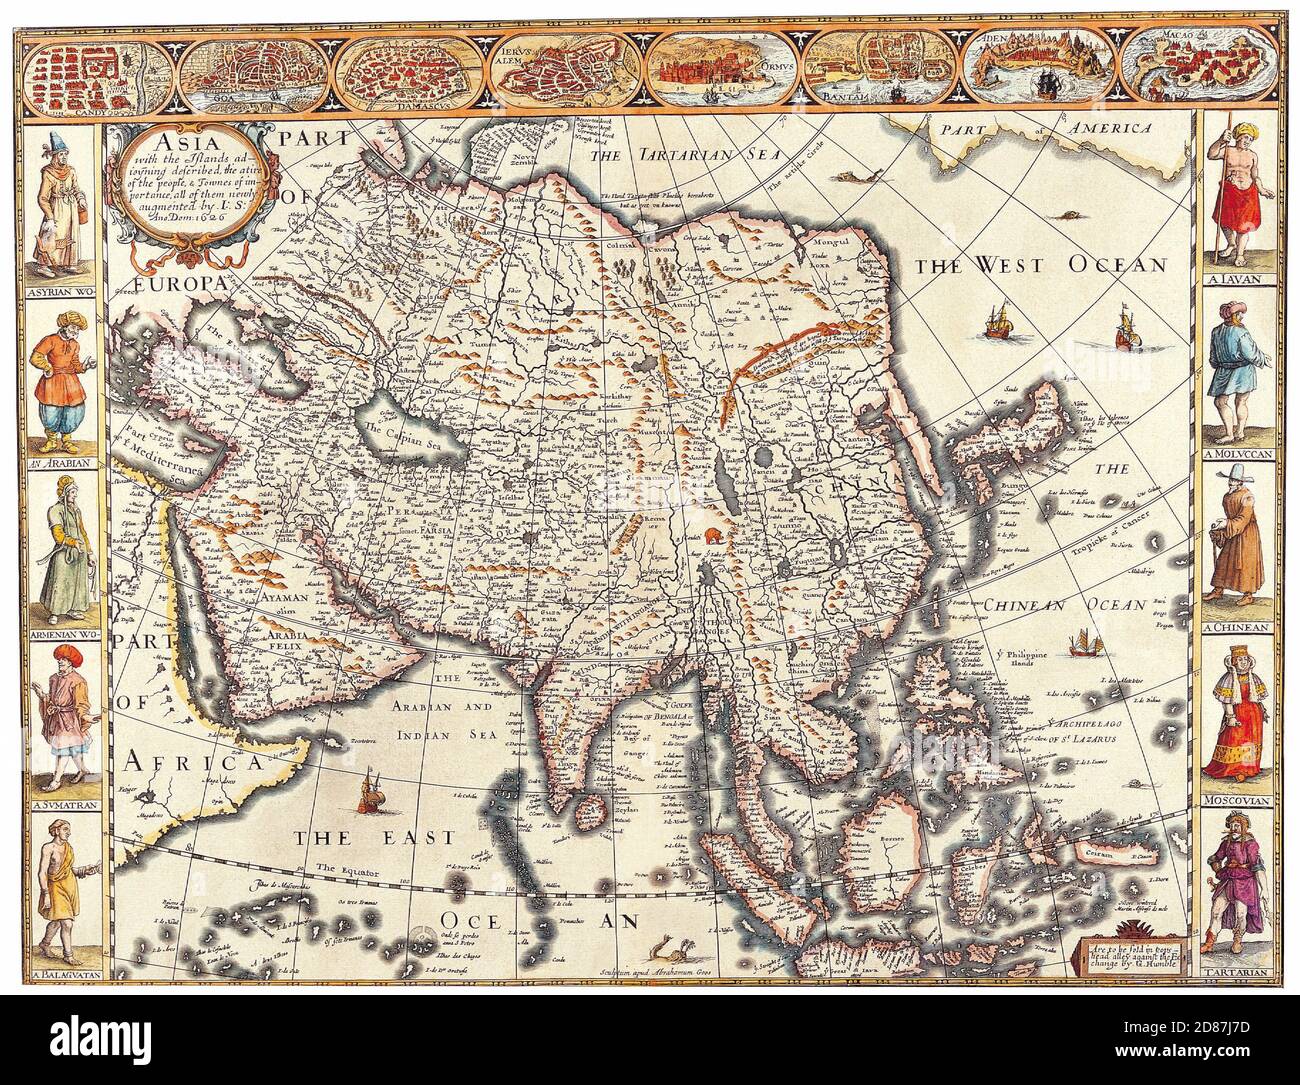 Antique Maps of the World. Map of Asia. John Speed. c 1626 Stock Photo